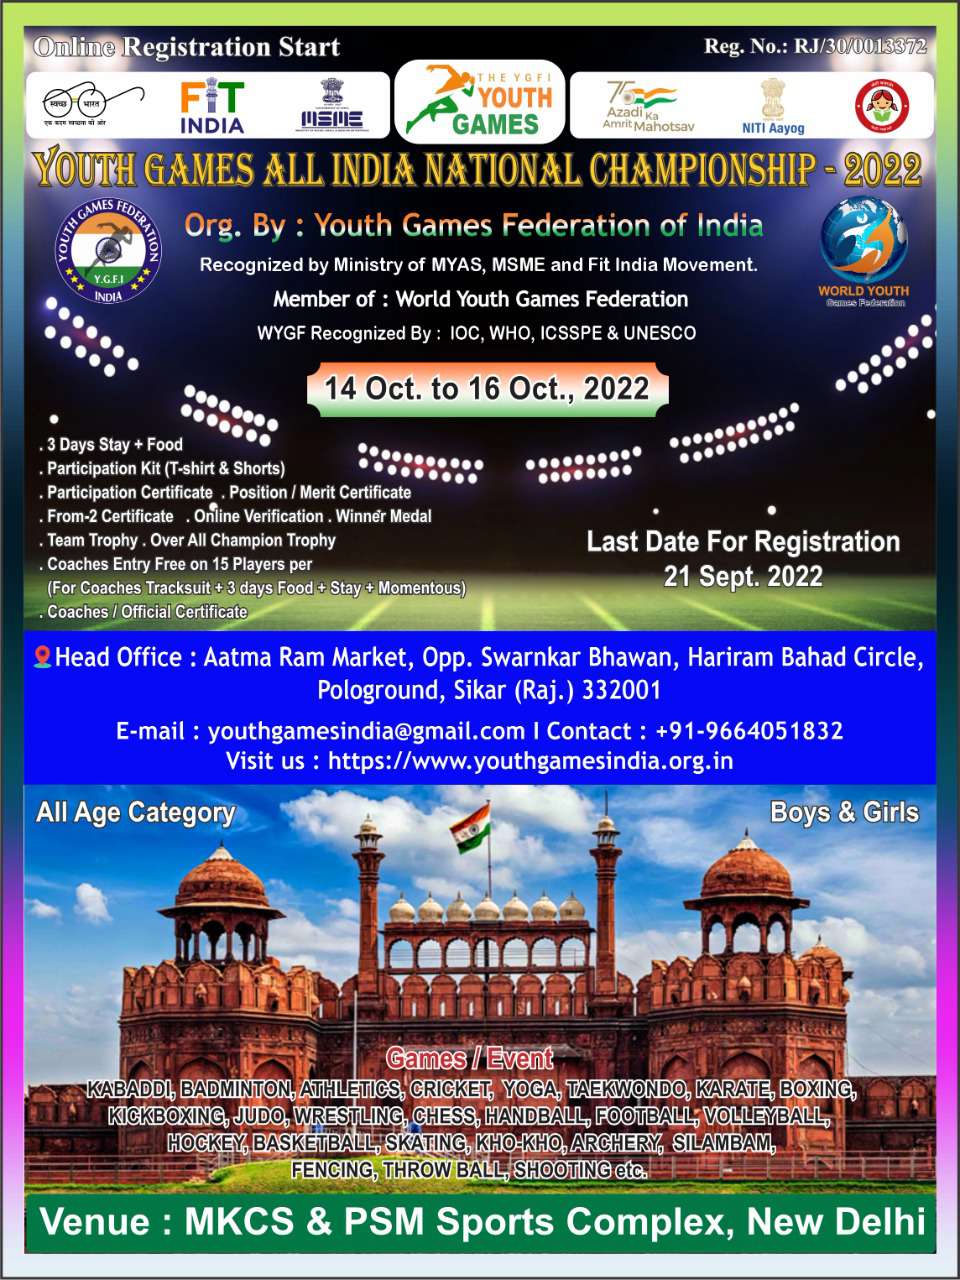 YOUTH GAMES ALL INDIA NATIONAL CHAMPIONSHIP - 2022